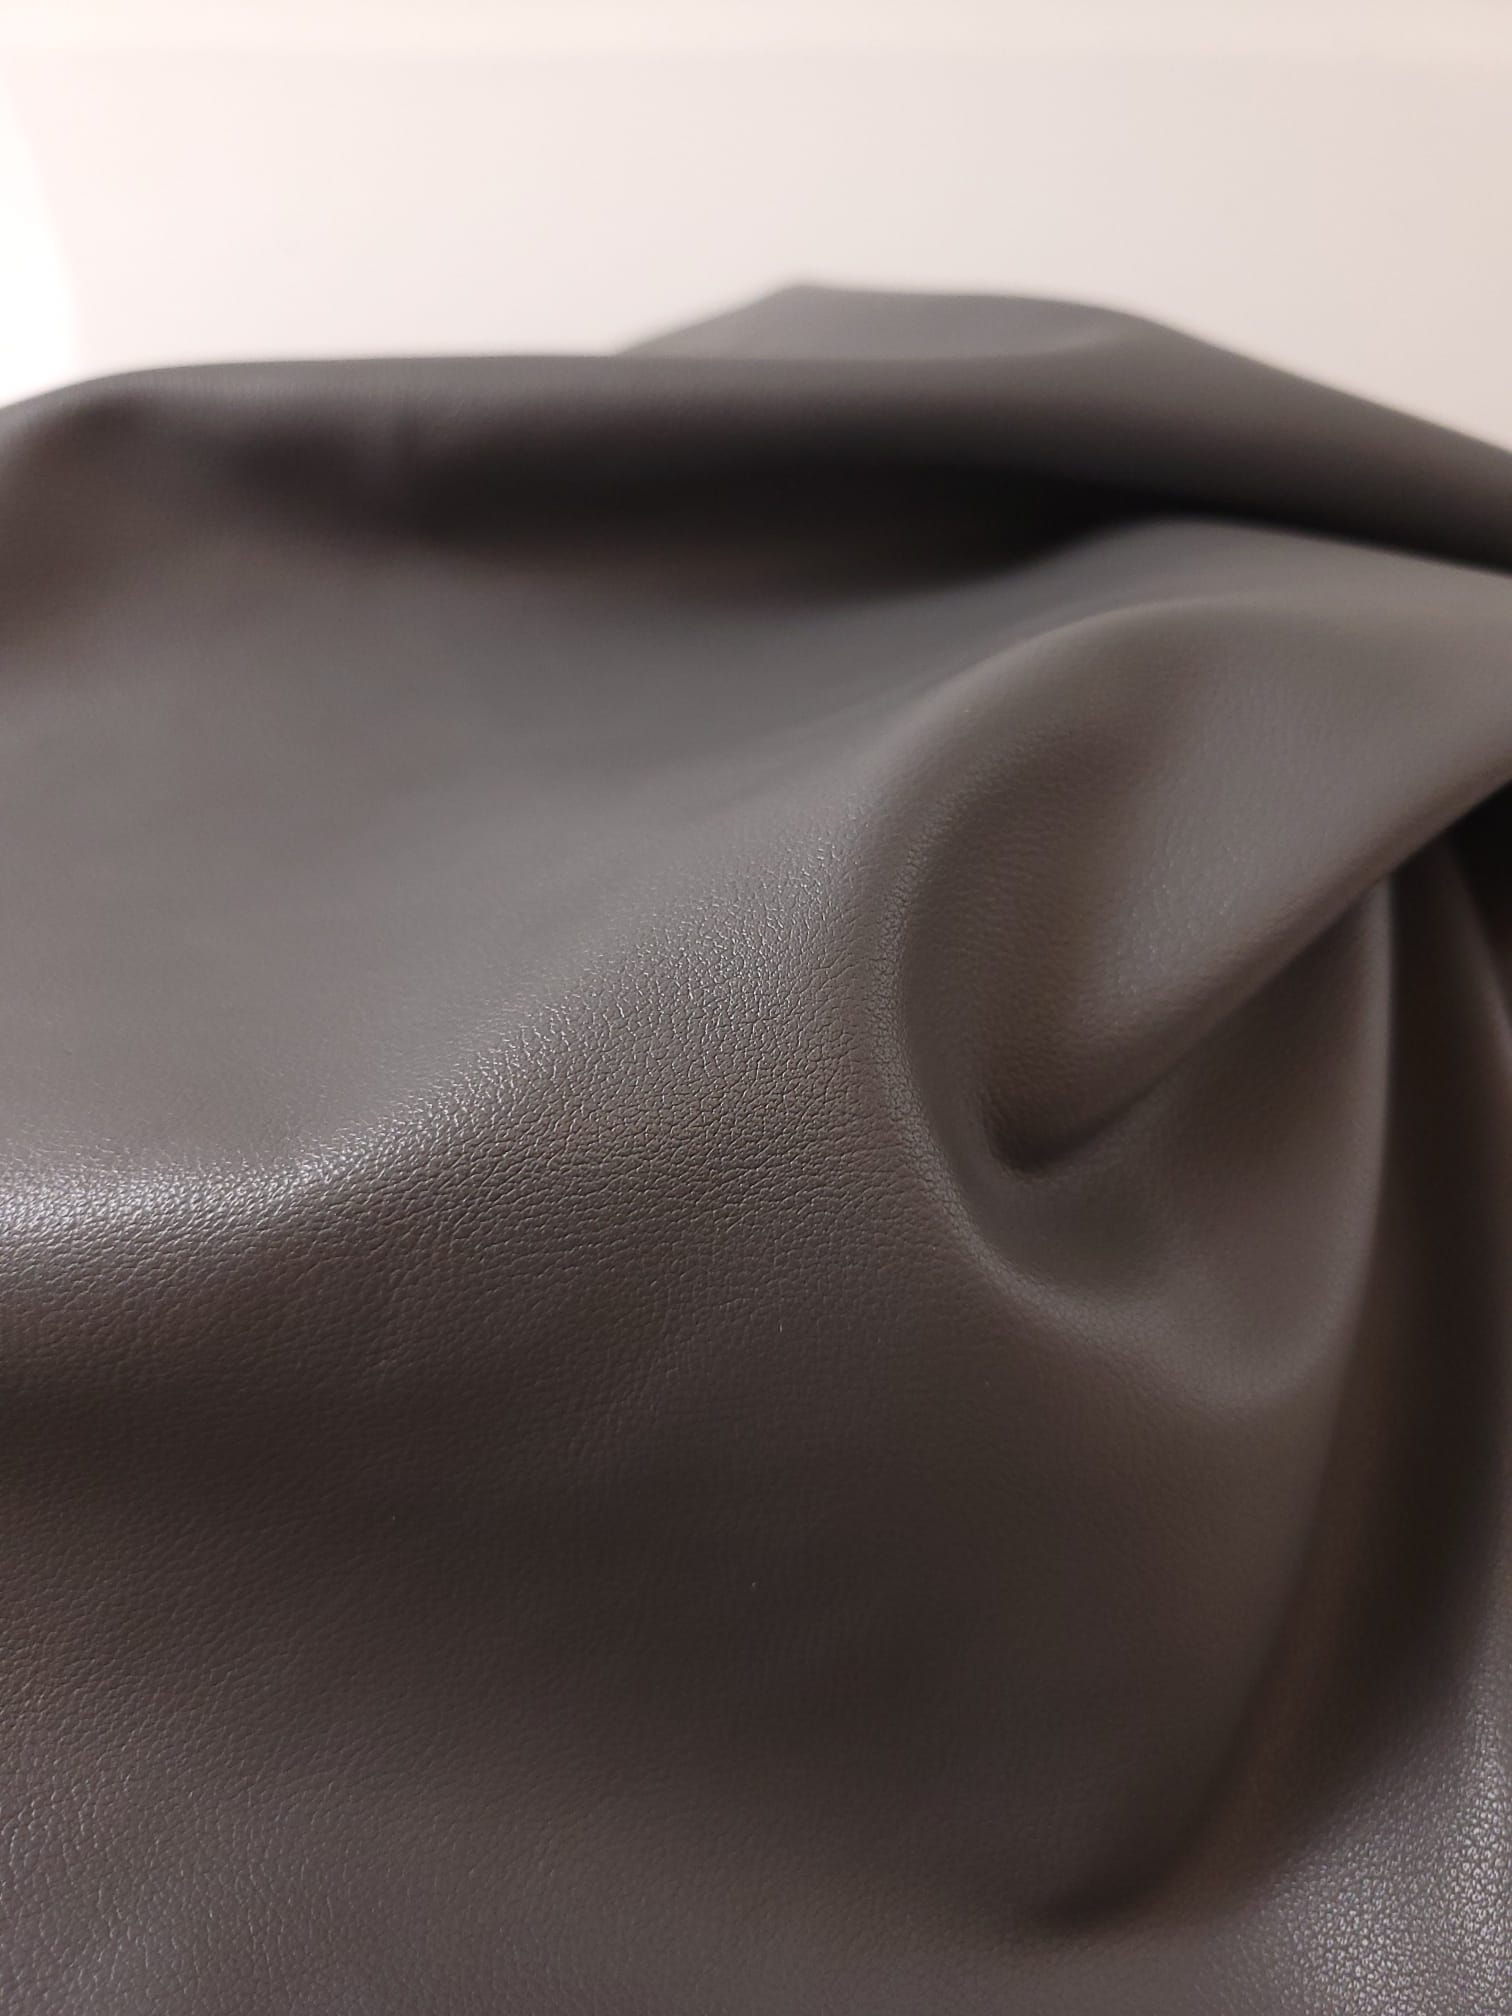  Faux vegan leather by the yard sheets distressed leather fabric for upholstery 30,000 Double Rubs vinyl sheets nappa leather crafts bookbinding books furniture fabrics uphilstery fuax material pu pleather faiux learher cruelty free nappa seat dark gray soft